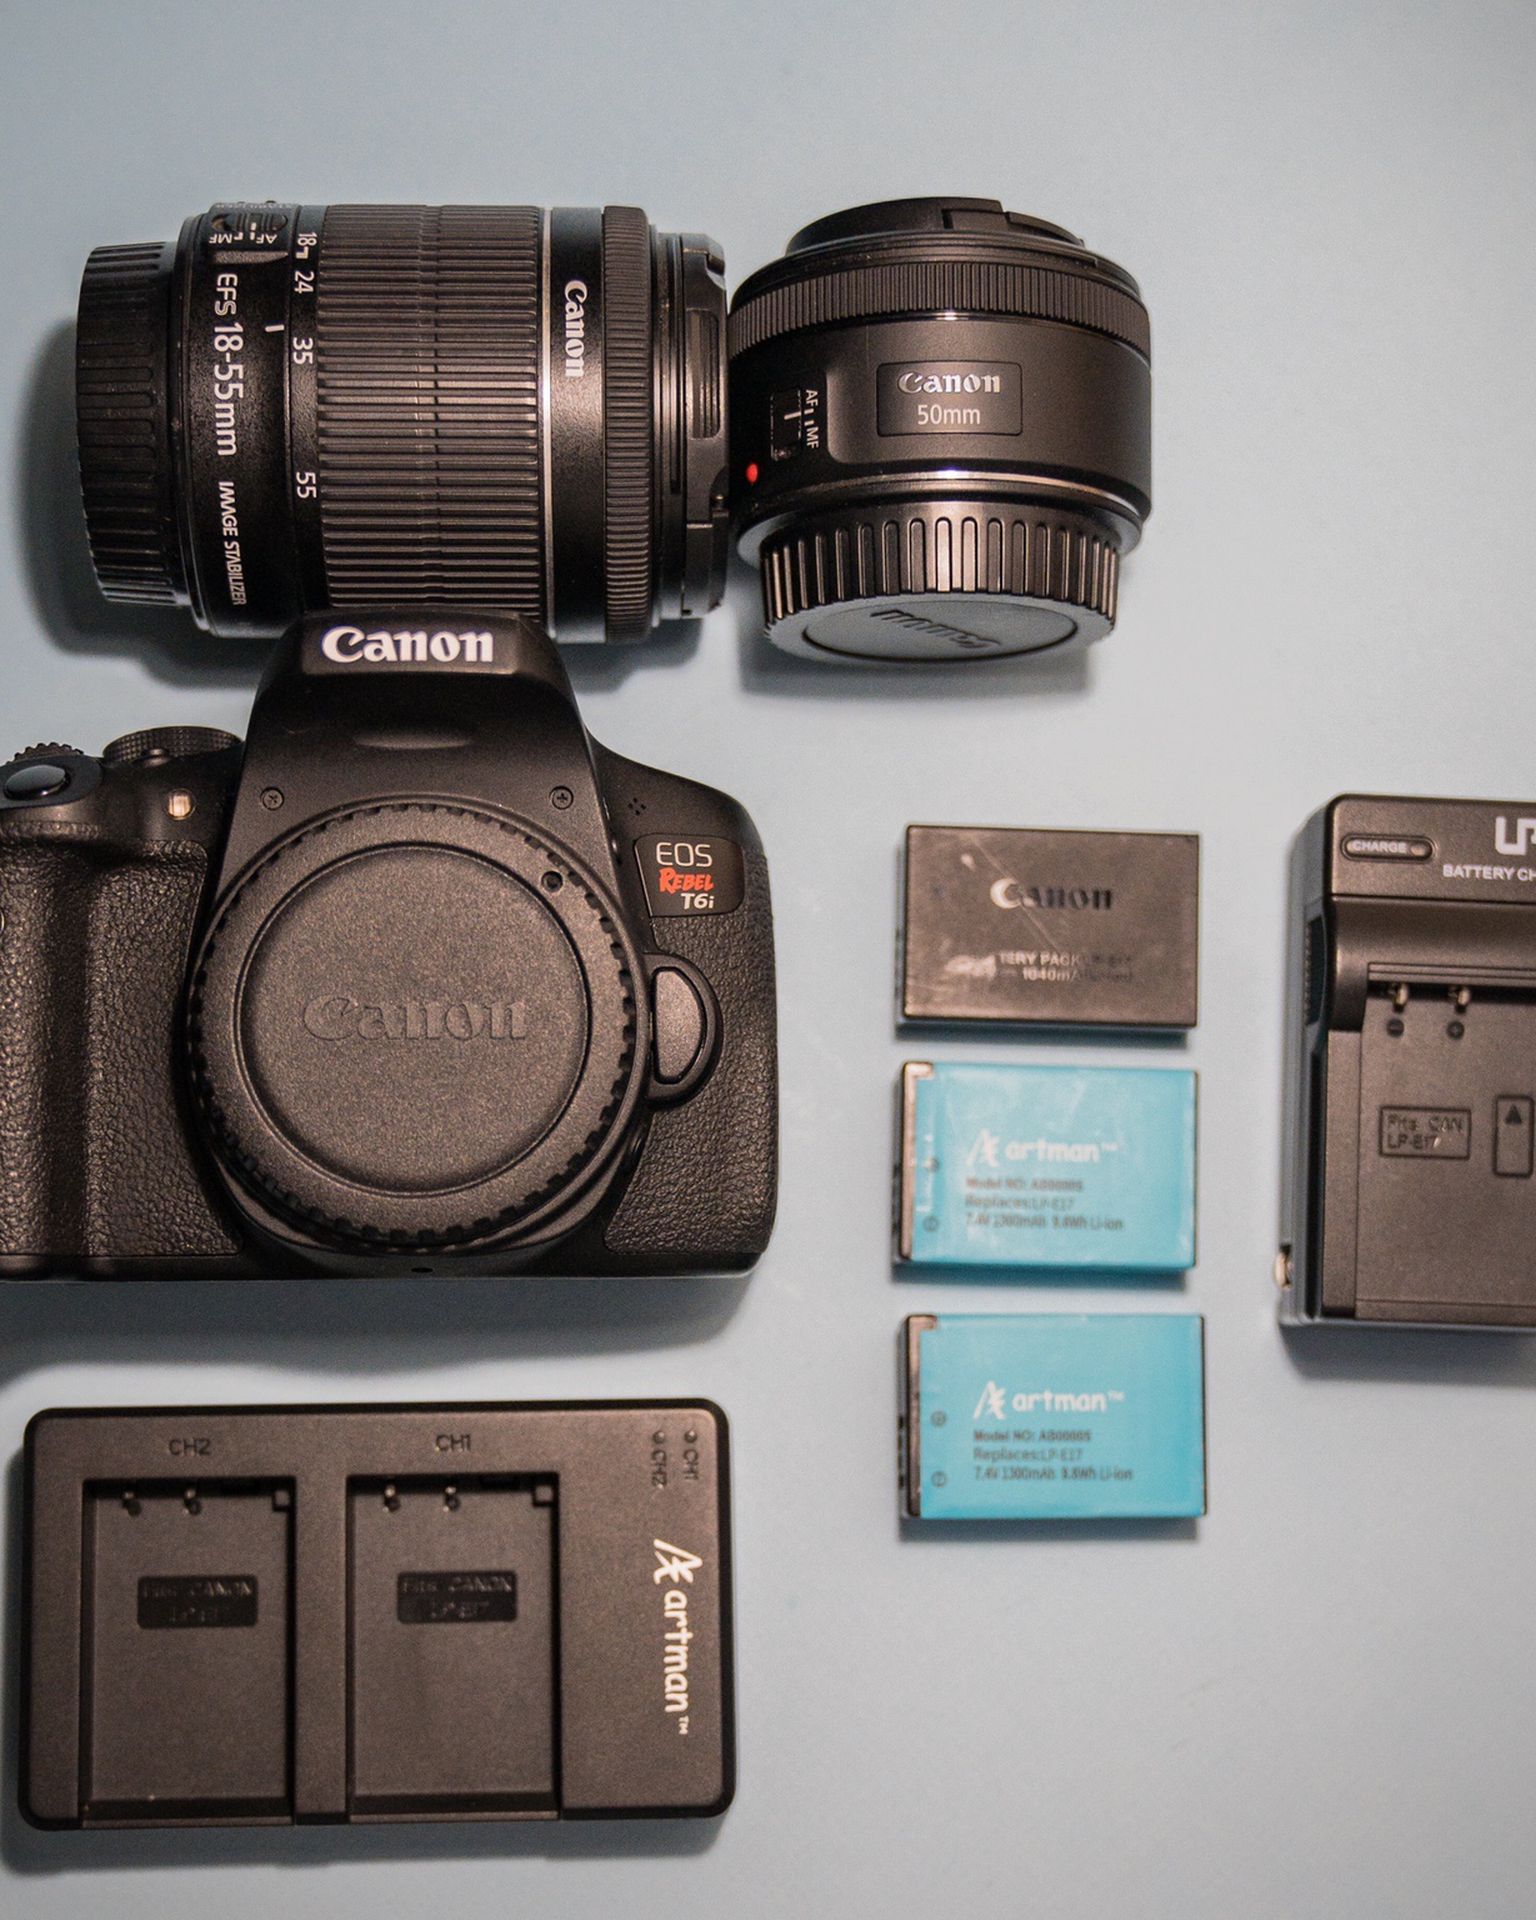 Canon T6i w/ Kit lens, 50mm 1.8, 3 Batteries + Chargers